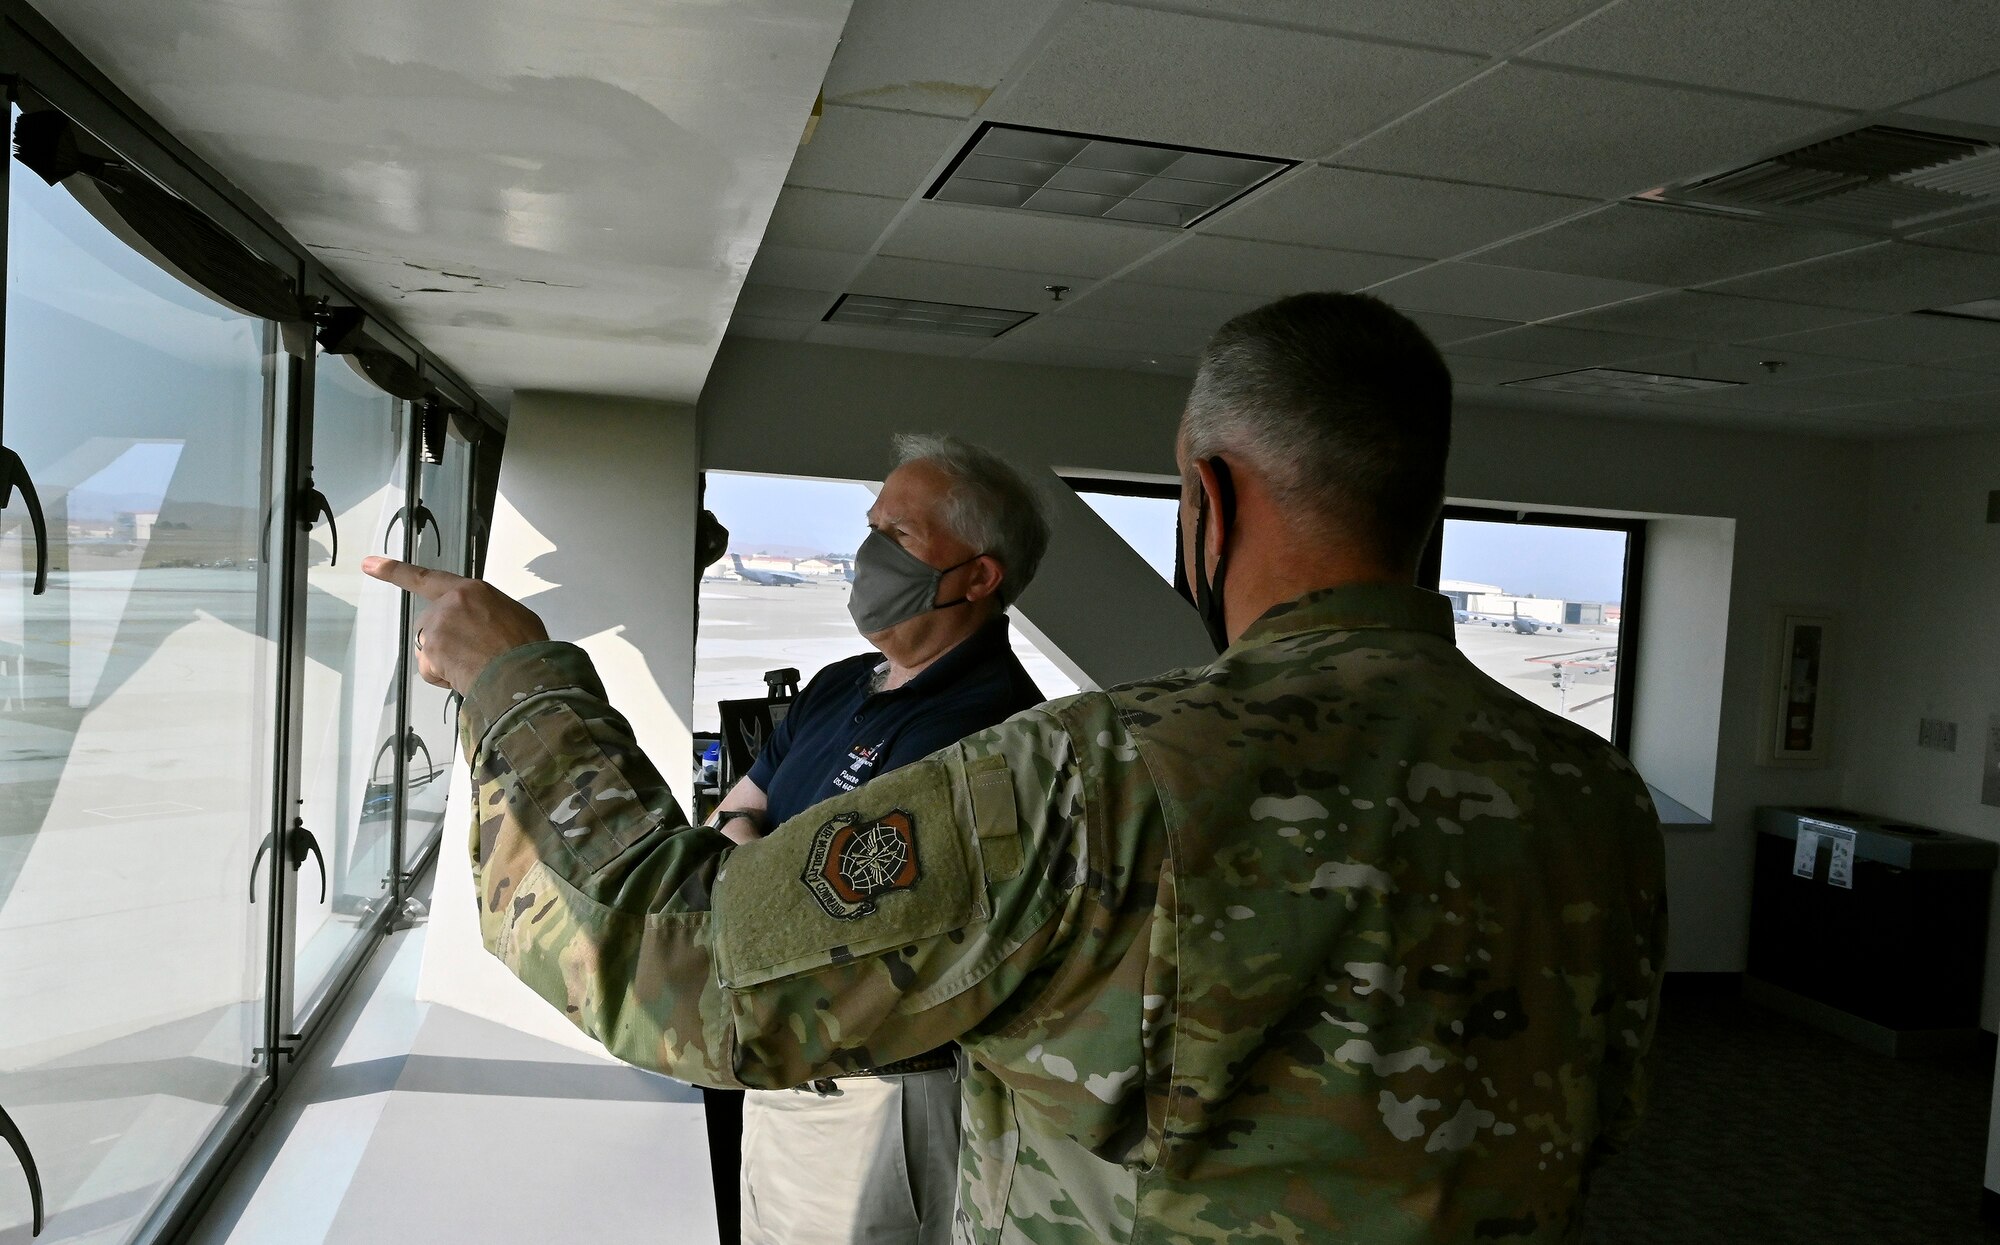 Secretary of the Air Force Frank Kendall is briefed by Col. Corey Simmons, 60th Air Mobility commander on flightline operations from the tower at Travis Air Force Base, Calif., Aug. 16, 2021. Kendall made a stop at Travis AFB and was greeted by wing leadership. (U.S. Air Force photo by Wayne Clark)